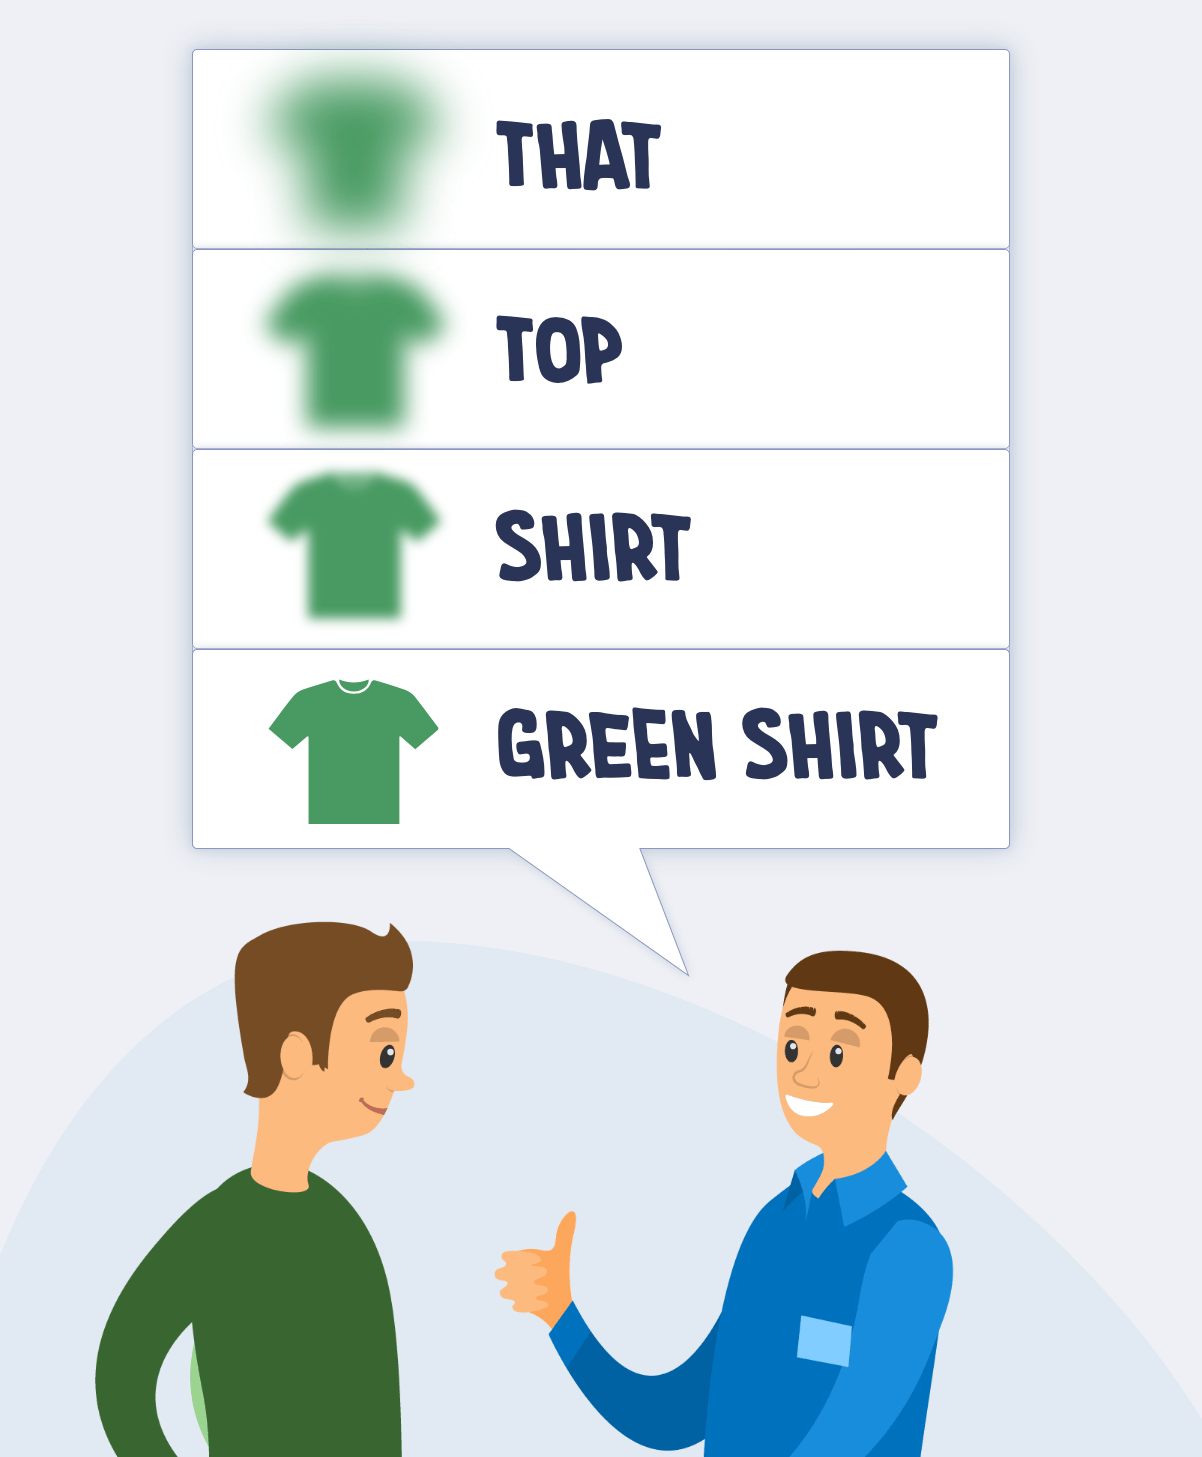 Salesperson progressively getting more concrete with word choices from "that" to "top" to "shirt" to "green tee-shirt"